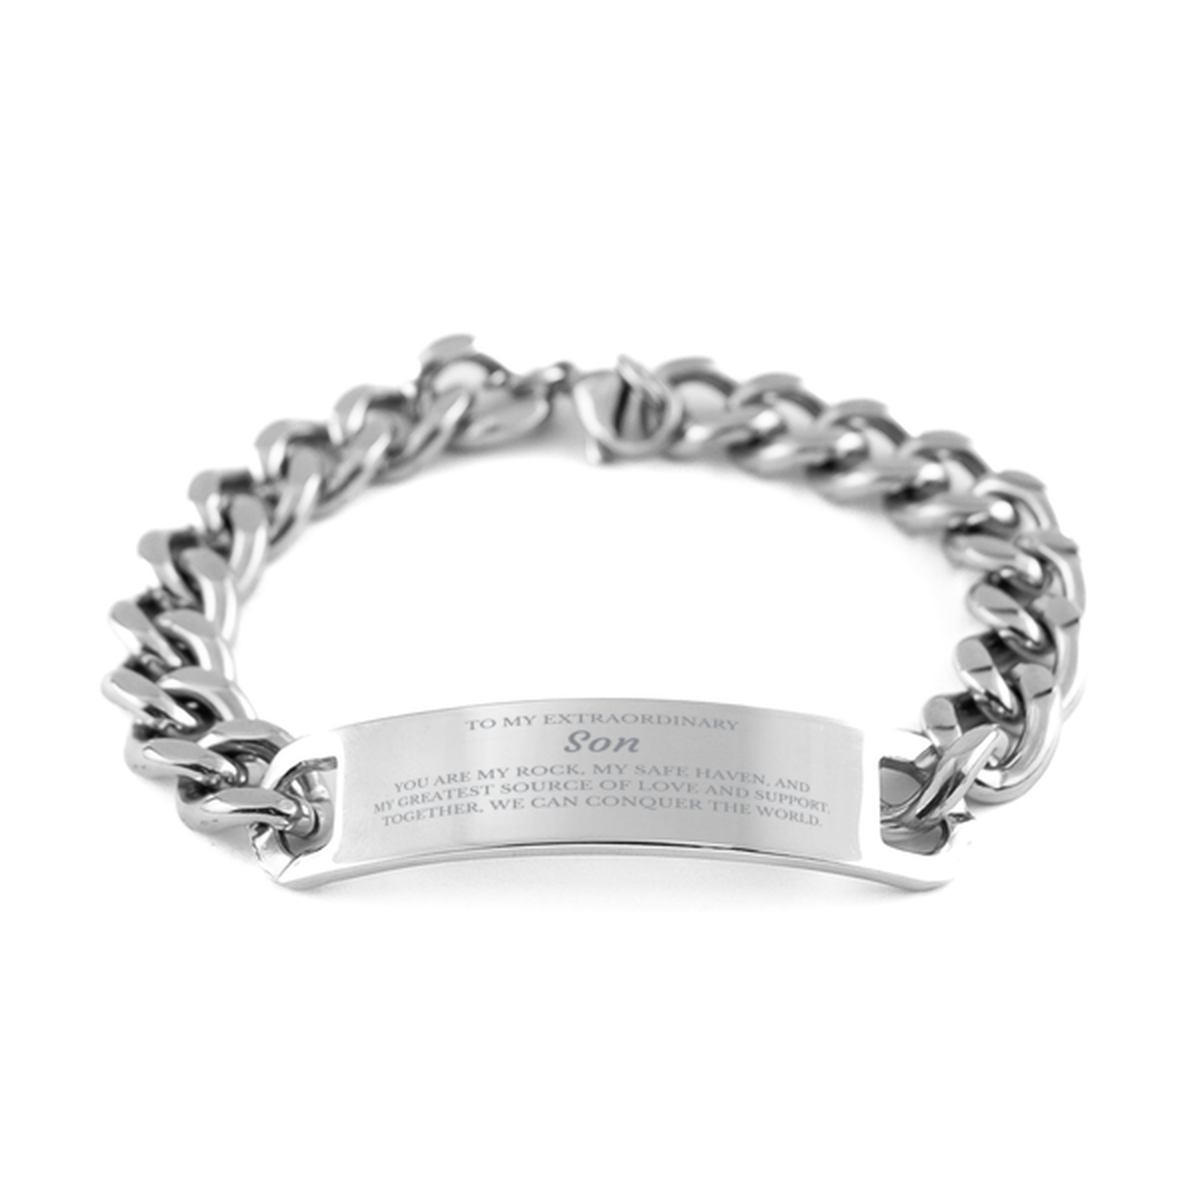 To My Extraordinary Son Gifts, Together, we can conquer the world, Birthday Cuban Chain Stainless Steel Bracelet For Son, Christmas Gifts For Son